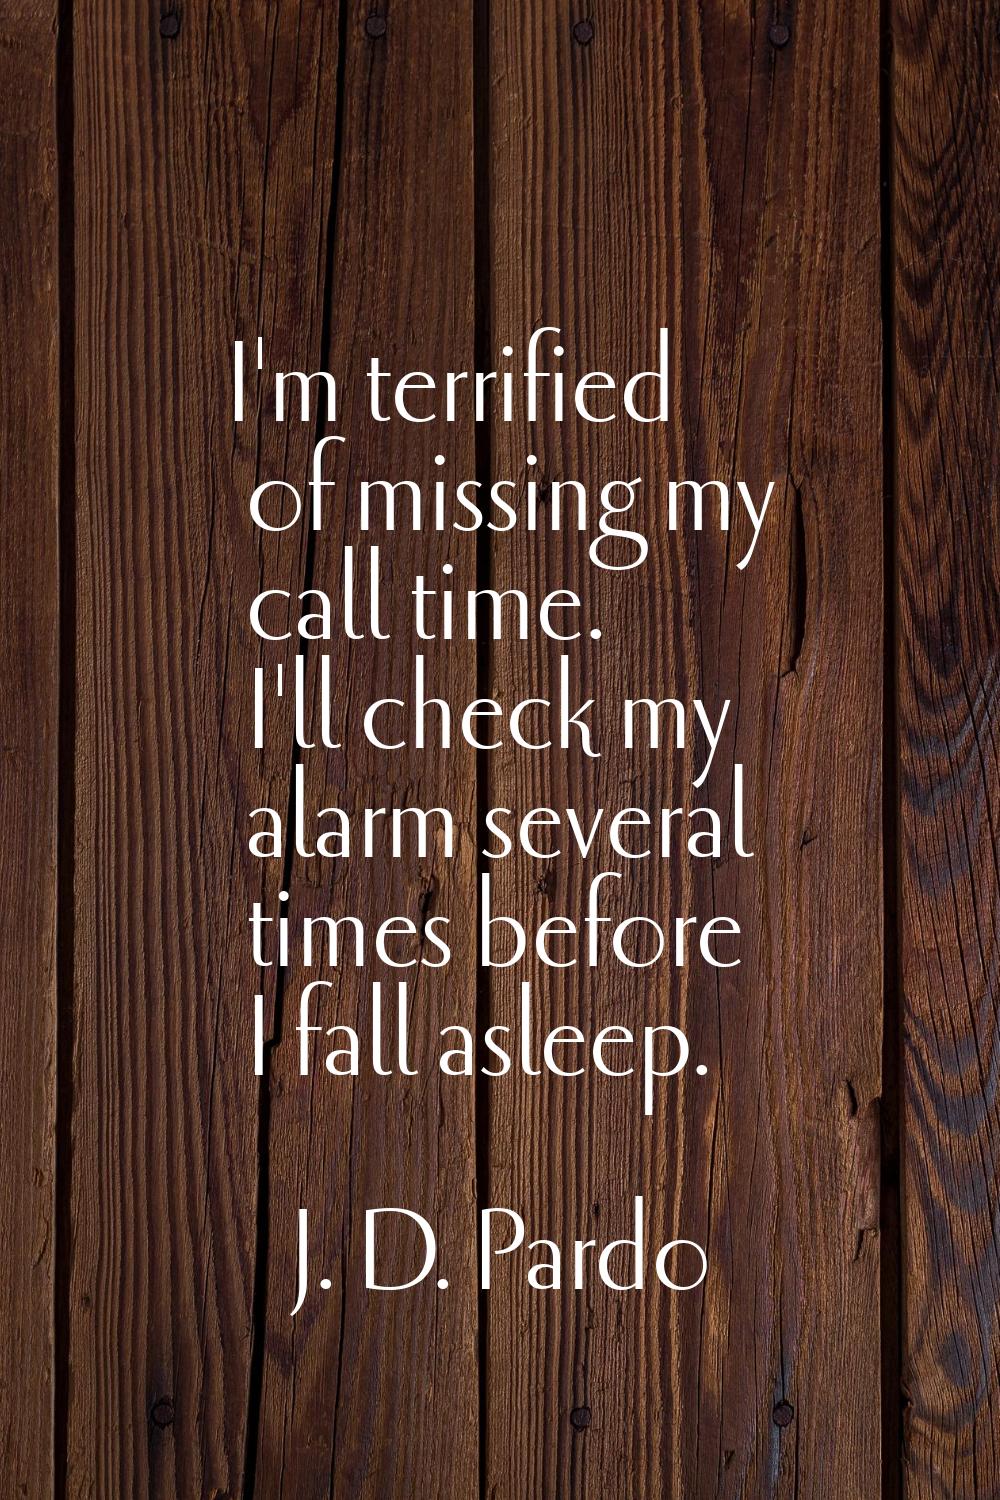 I'm terrified of missing my call time. I'll check my alarm several times before I fall asleep.